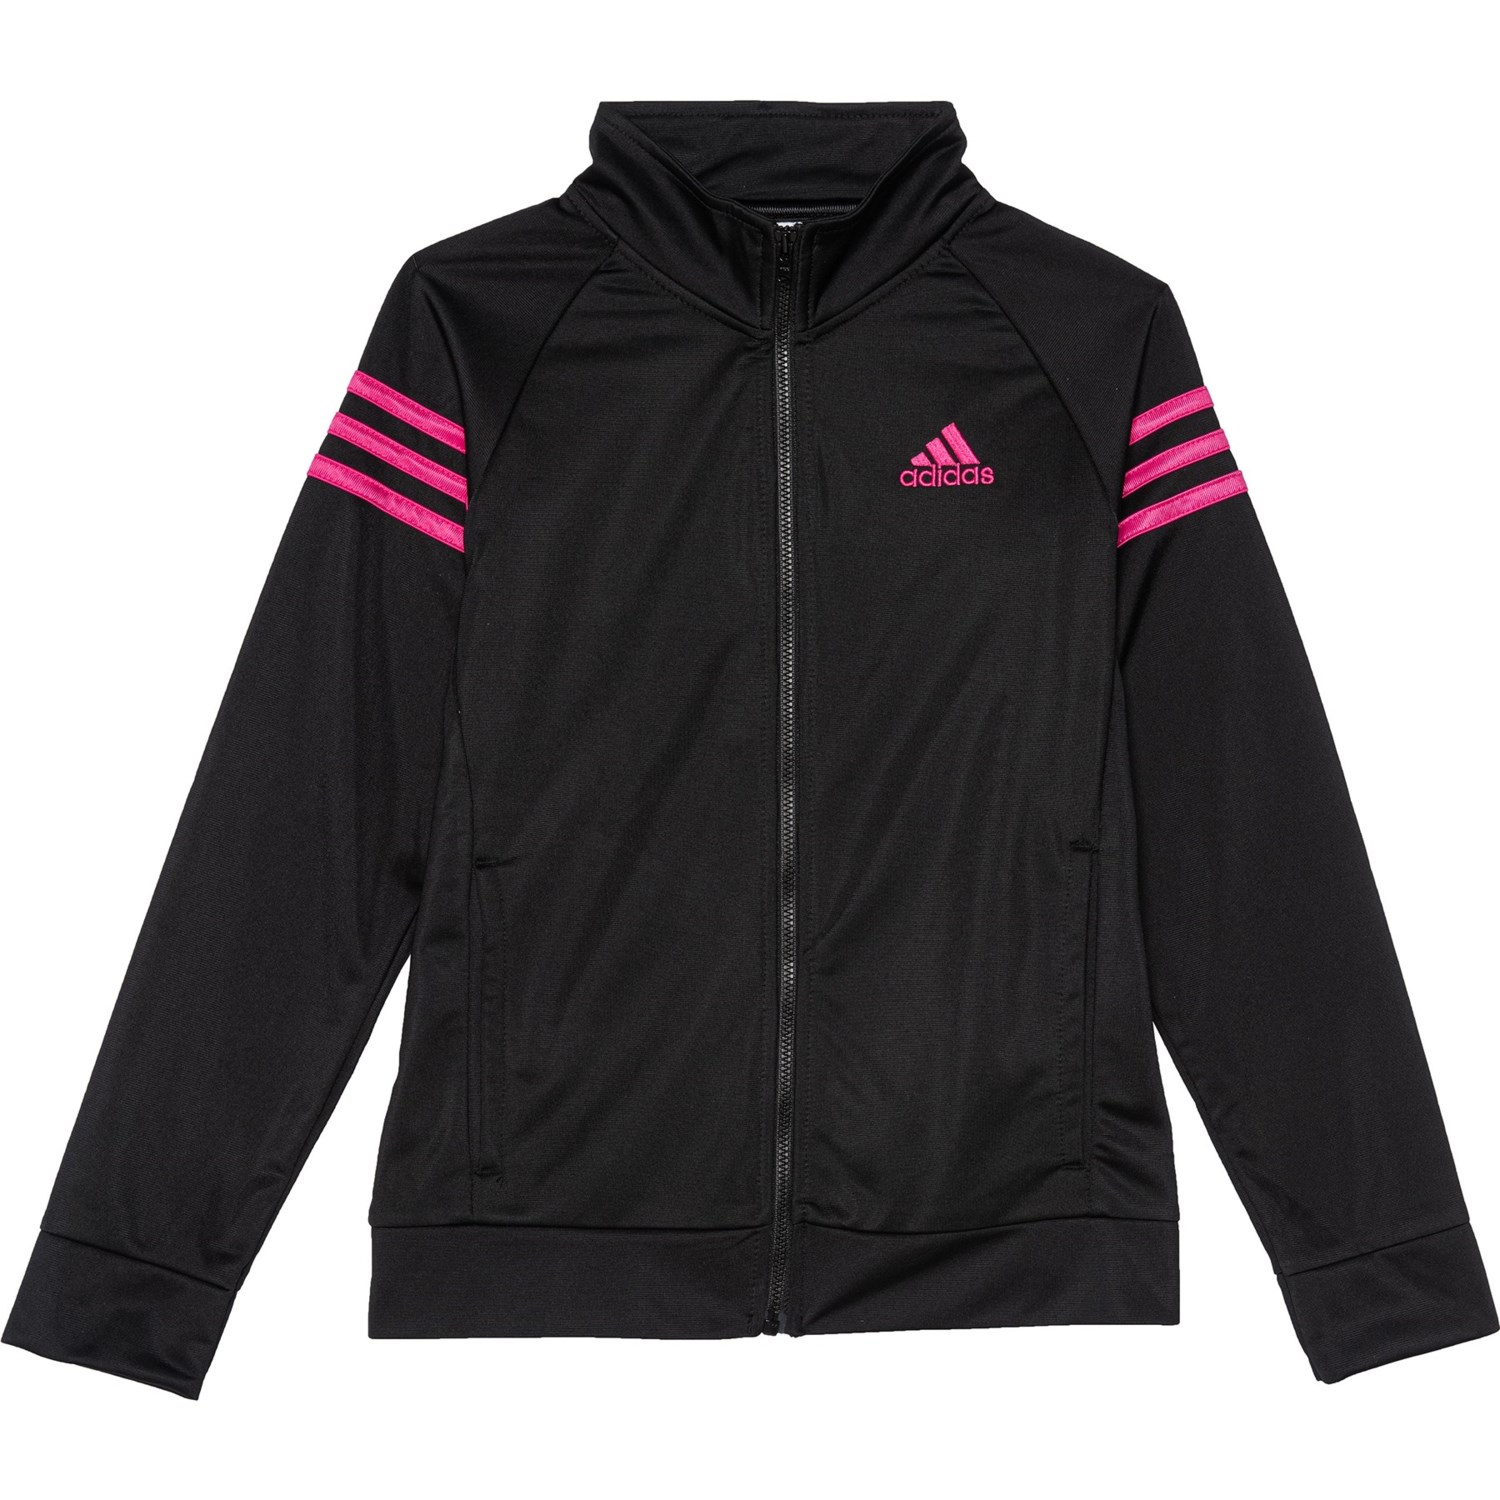 pink and black adidas outfit